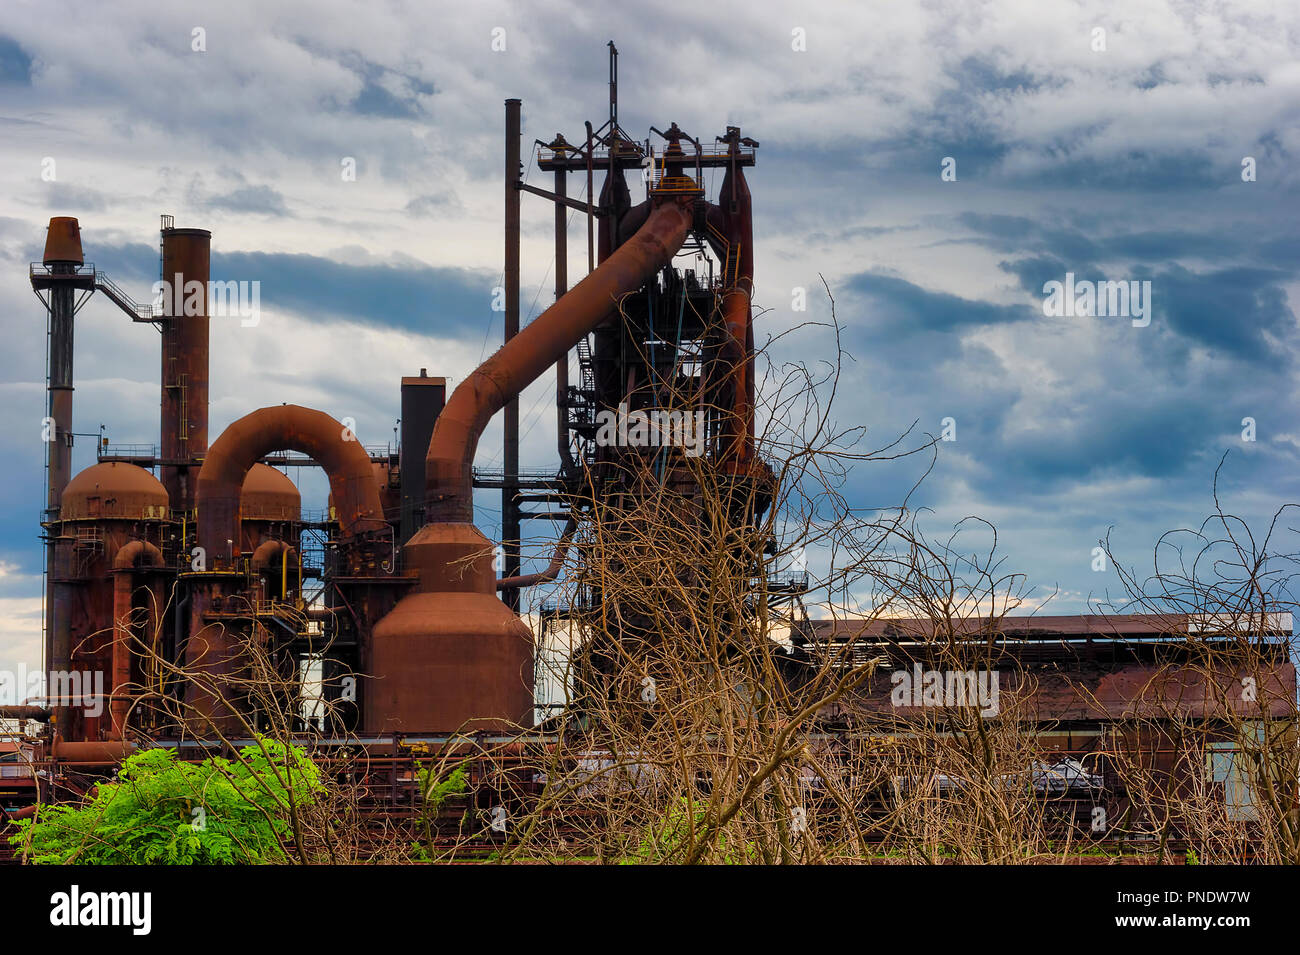 Evening light and cloudy skies enhanced this old Steel Mill in Ashland, Kentucky. Stock Photo